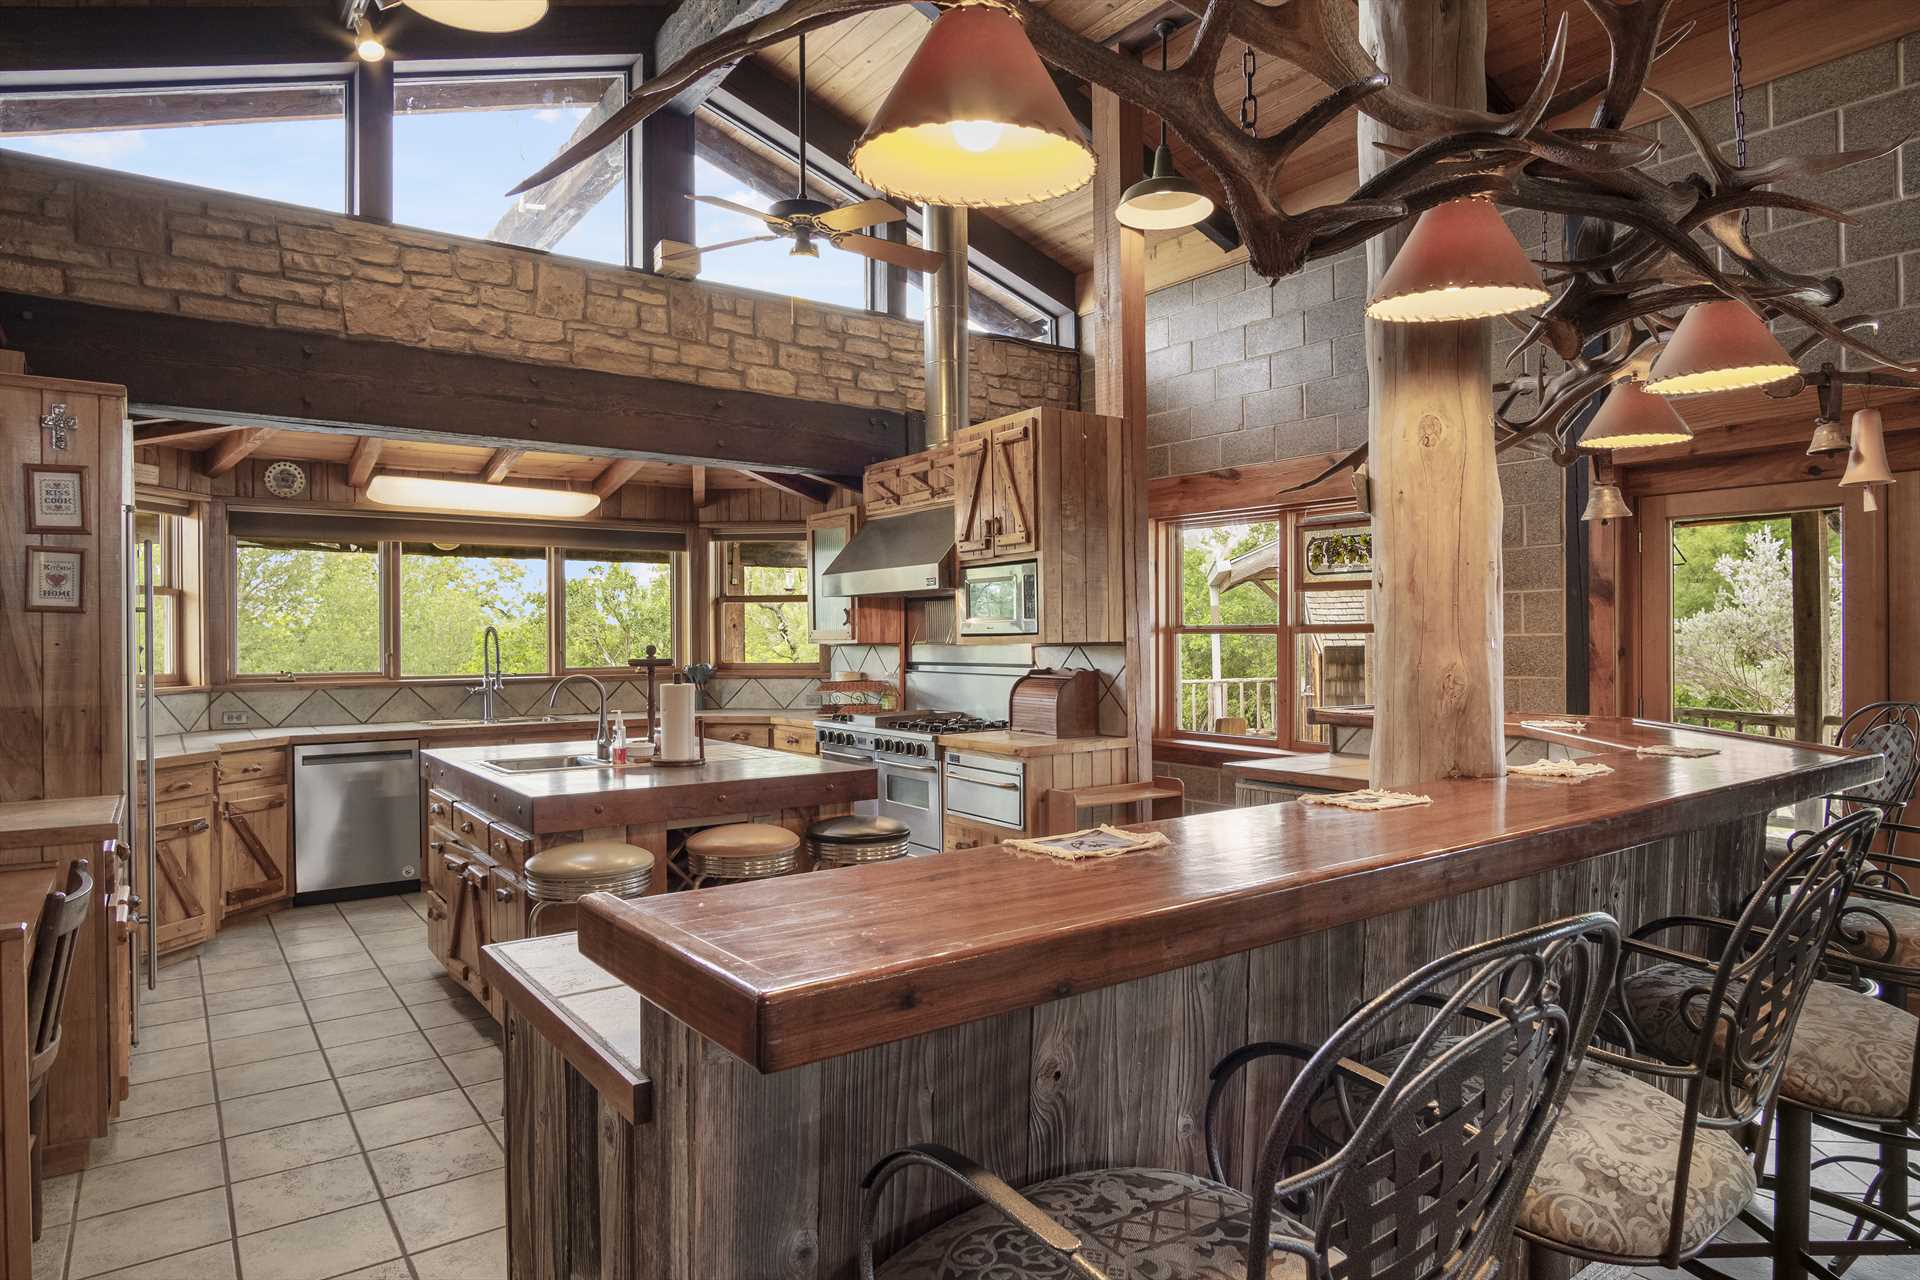                                                 Bar stool seating marks the gateway to the Lodge's full country kitchen!